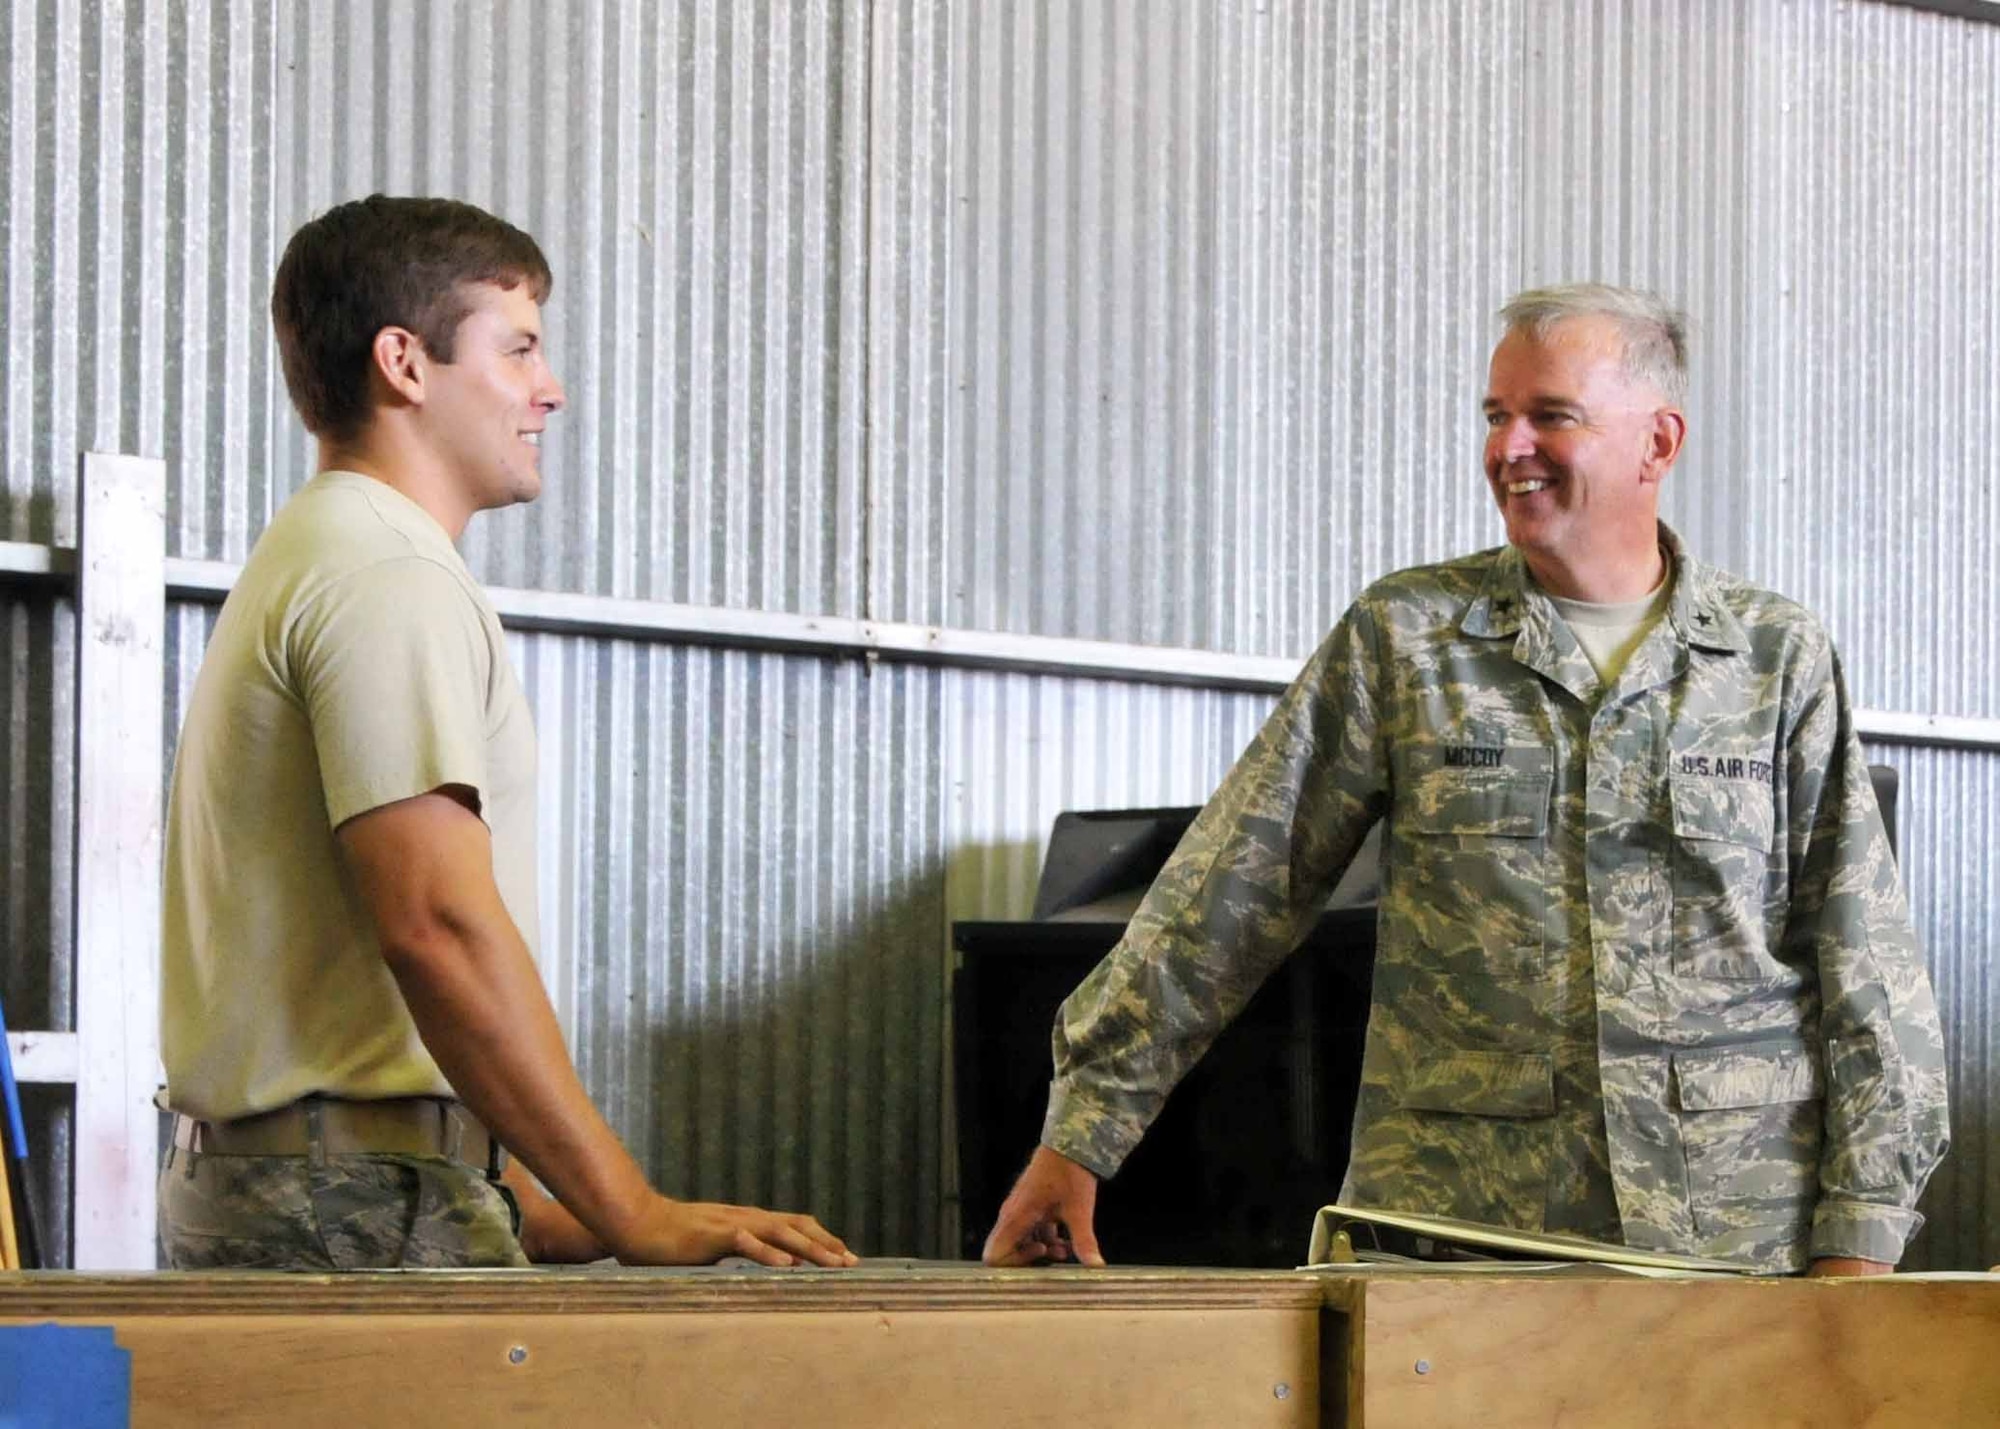 Brig. Gen. John E. McCoy, Assistant Adjutant General for Air, Wisconsin Air National Guard talks with Staff Sgt. Joshua A. Jeter during a visit to the 313th Air Expeditionary Wing in Western Europe on Saturday, July 30, 2011.